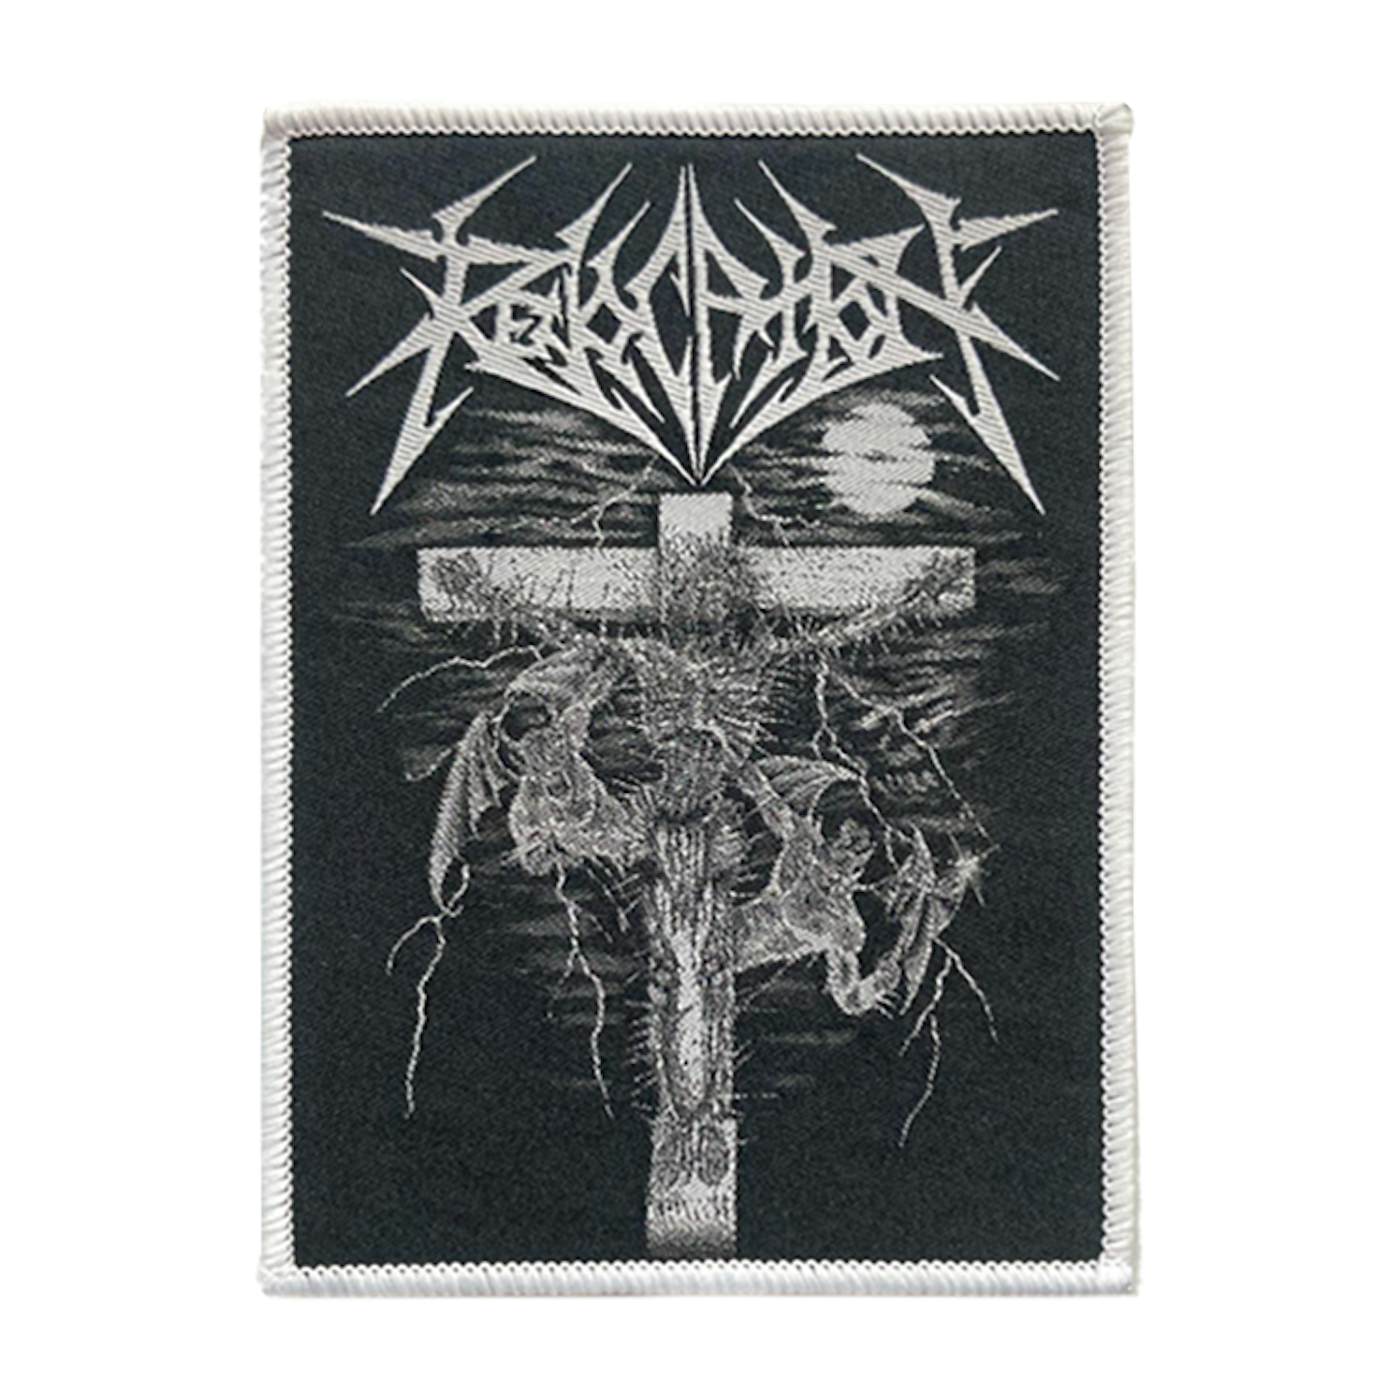 REVOCATION - 'Re-Crucified' Patch